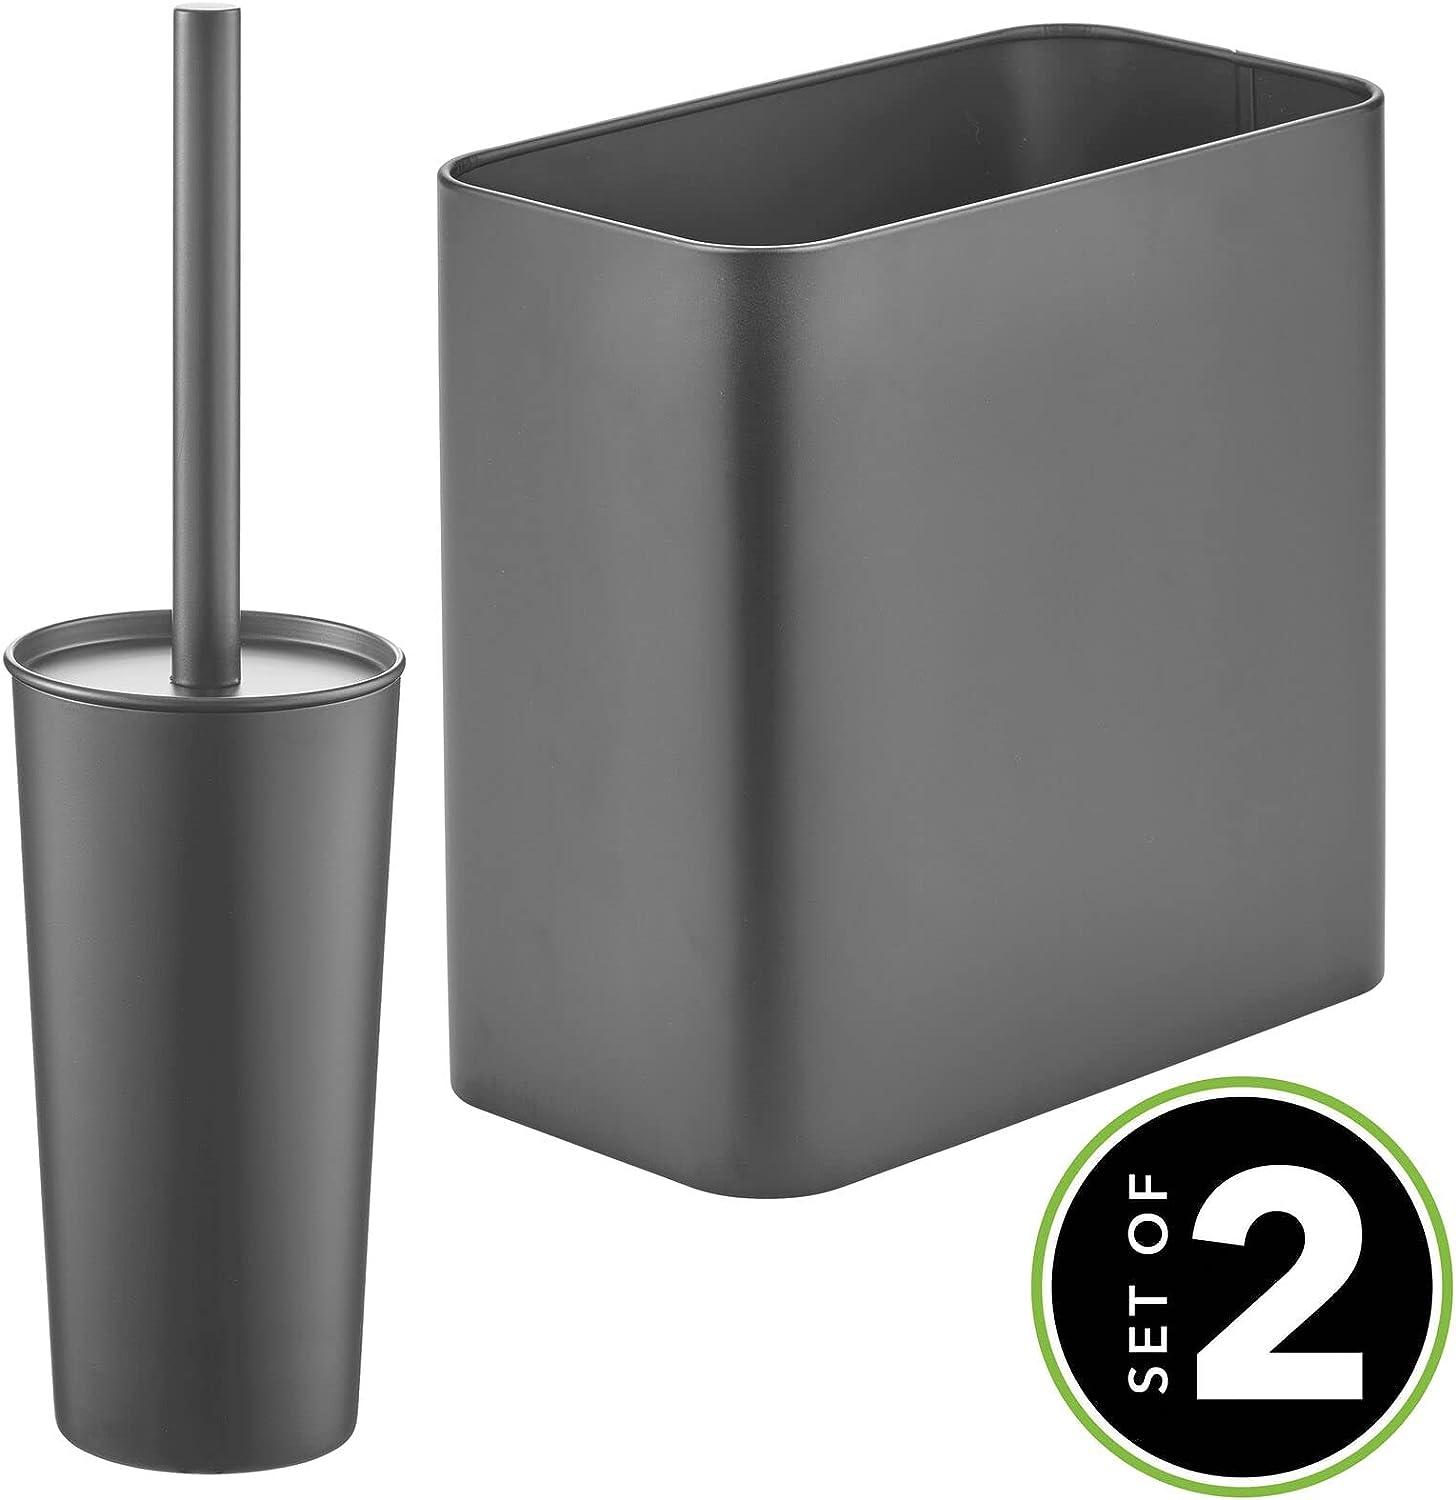 mDesign Steel/Plastic Toilet Bowl Brush/Holder and Rectangular 2.2 Gallon  Garbage Can Combo Set for Bathroom Holds Trash, Recycling, Deep Cleaning,  Mirri Collection - Set of 2 - Graphite Gray